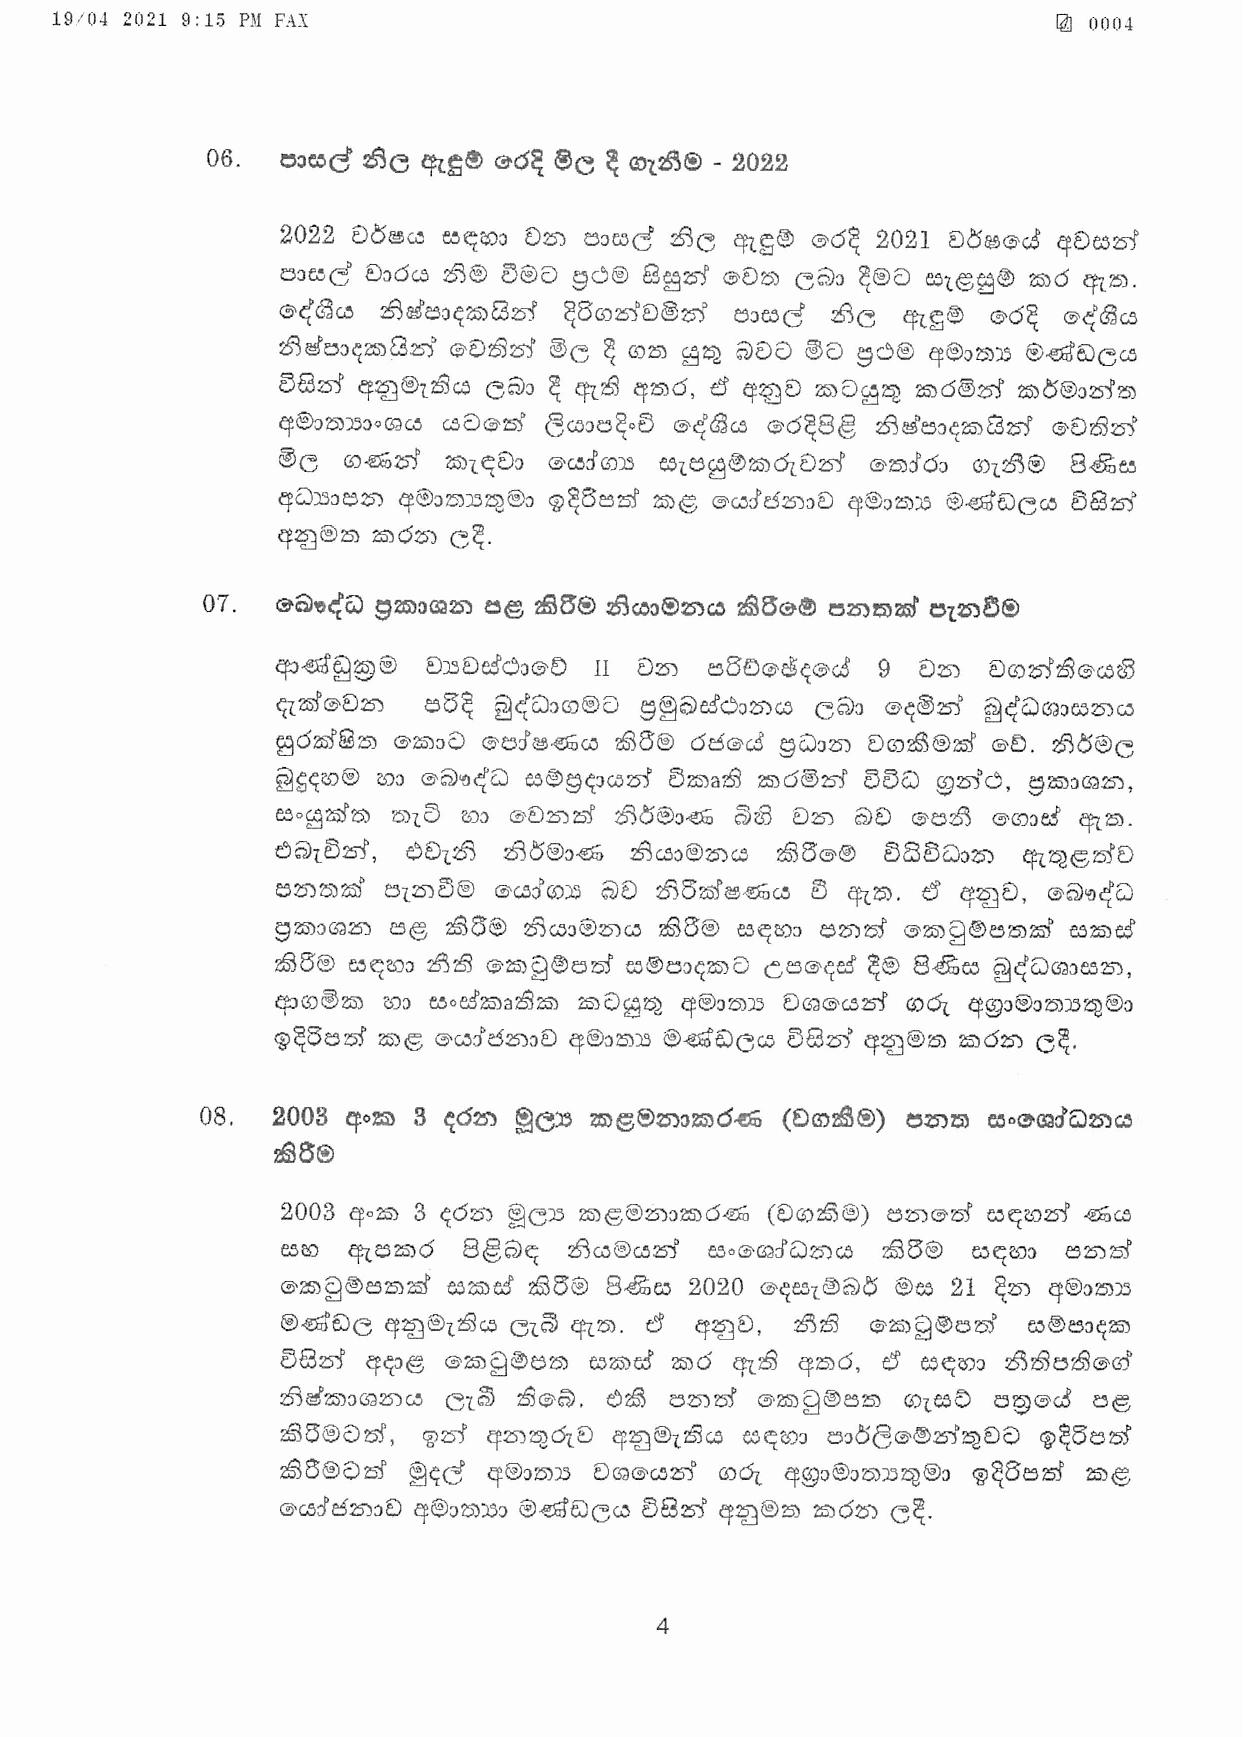 Cabinet Decision on 19.04.2021 page 004